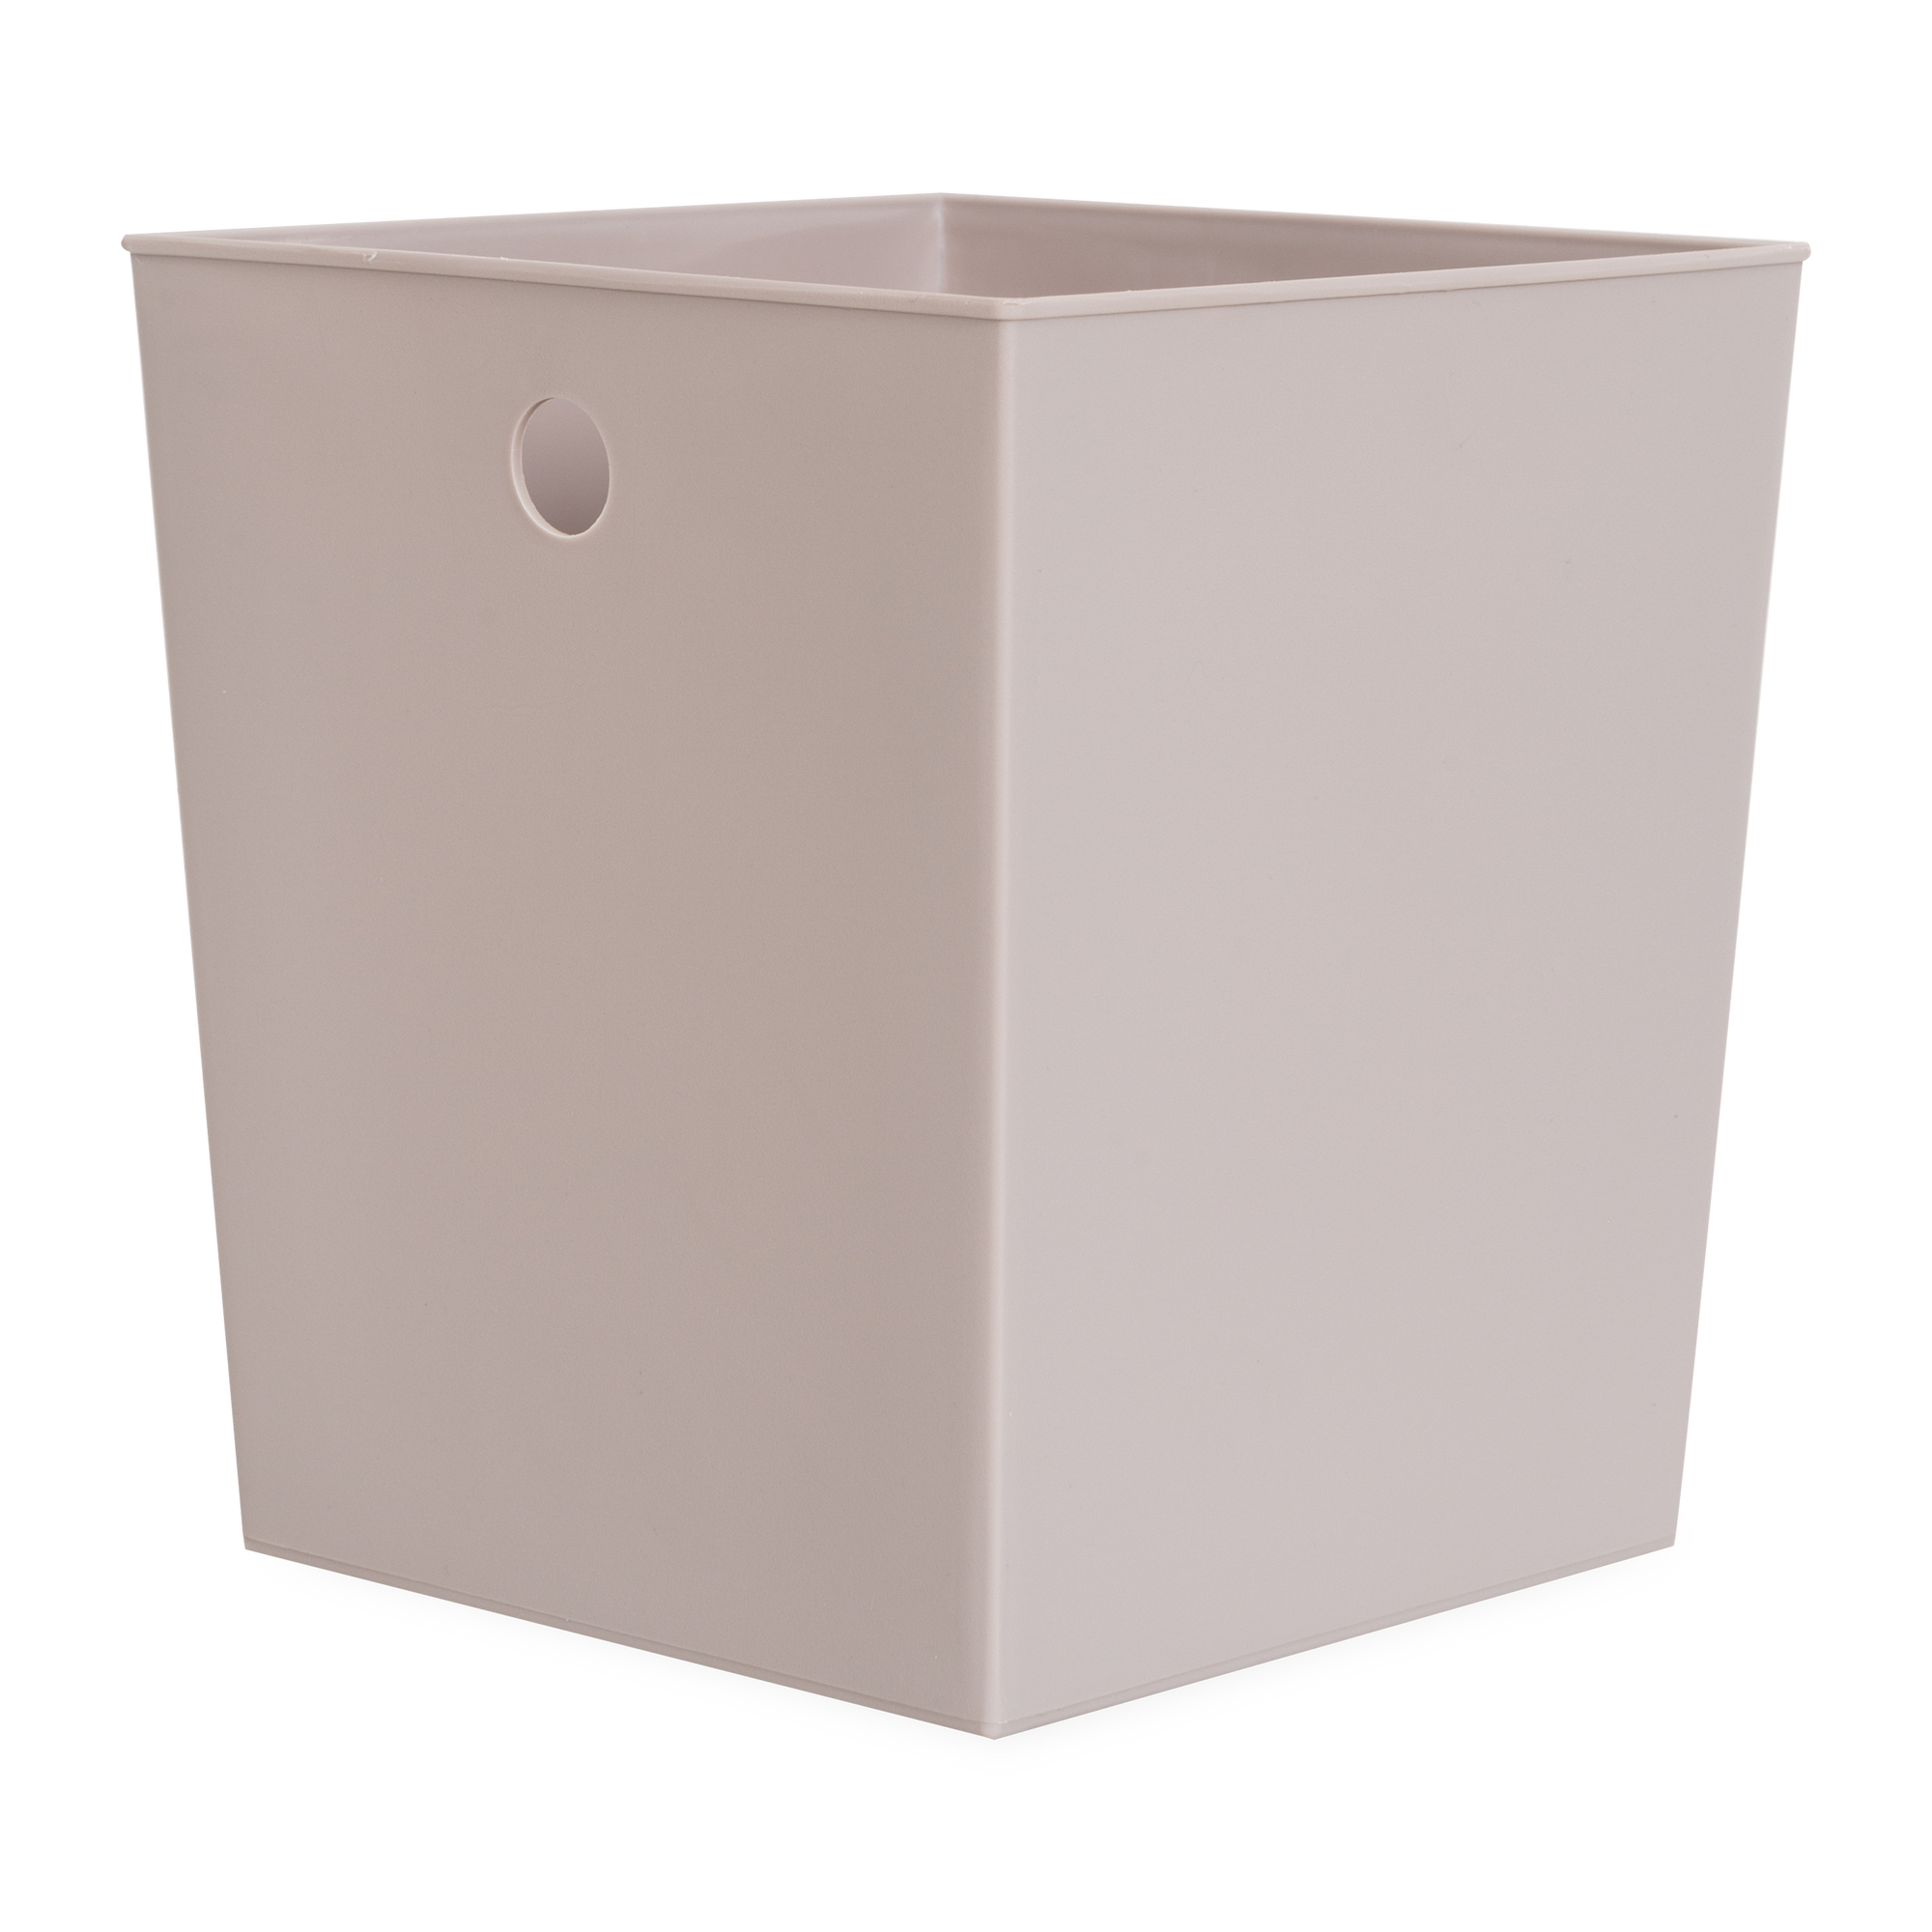 A perfect waste basket liner that is sleek and can fit in any 7